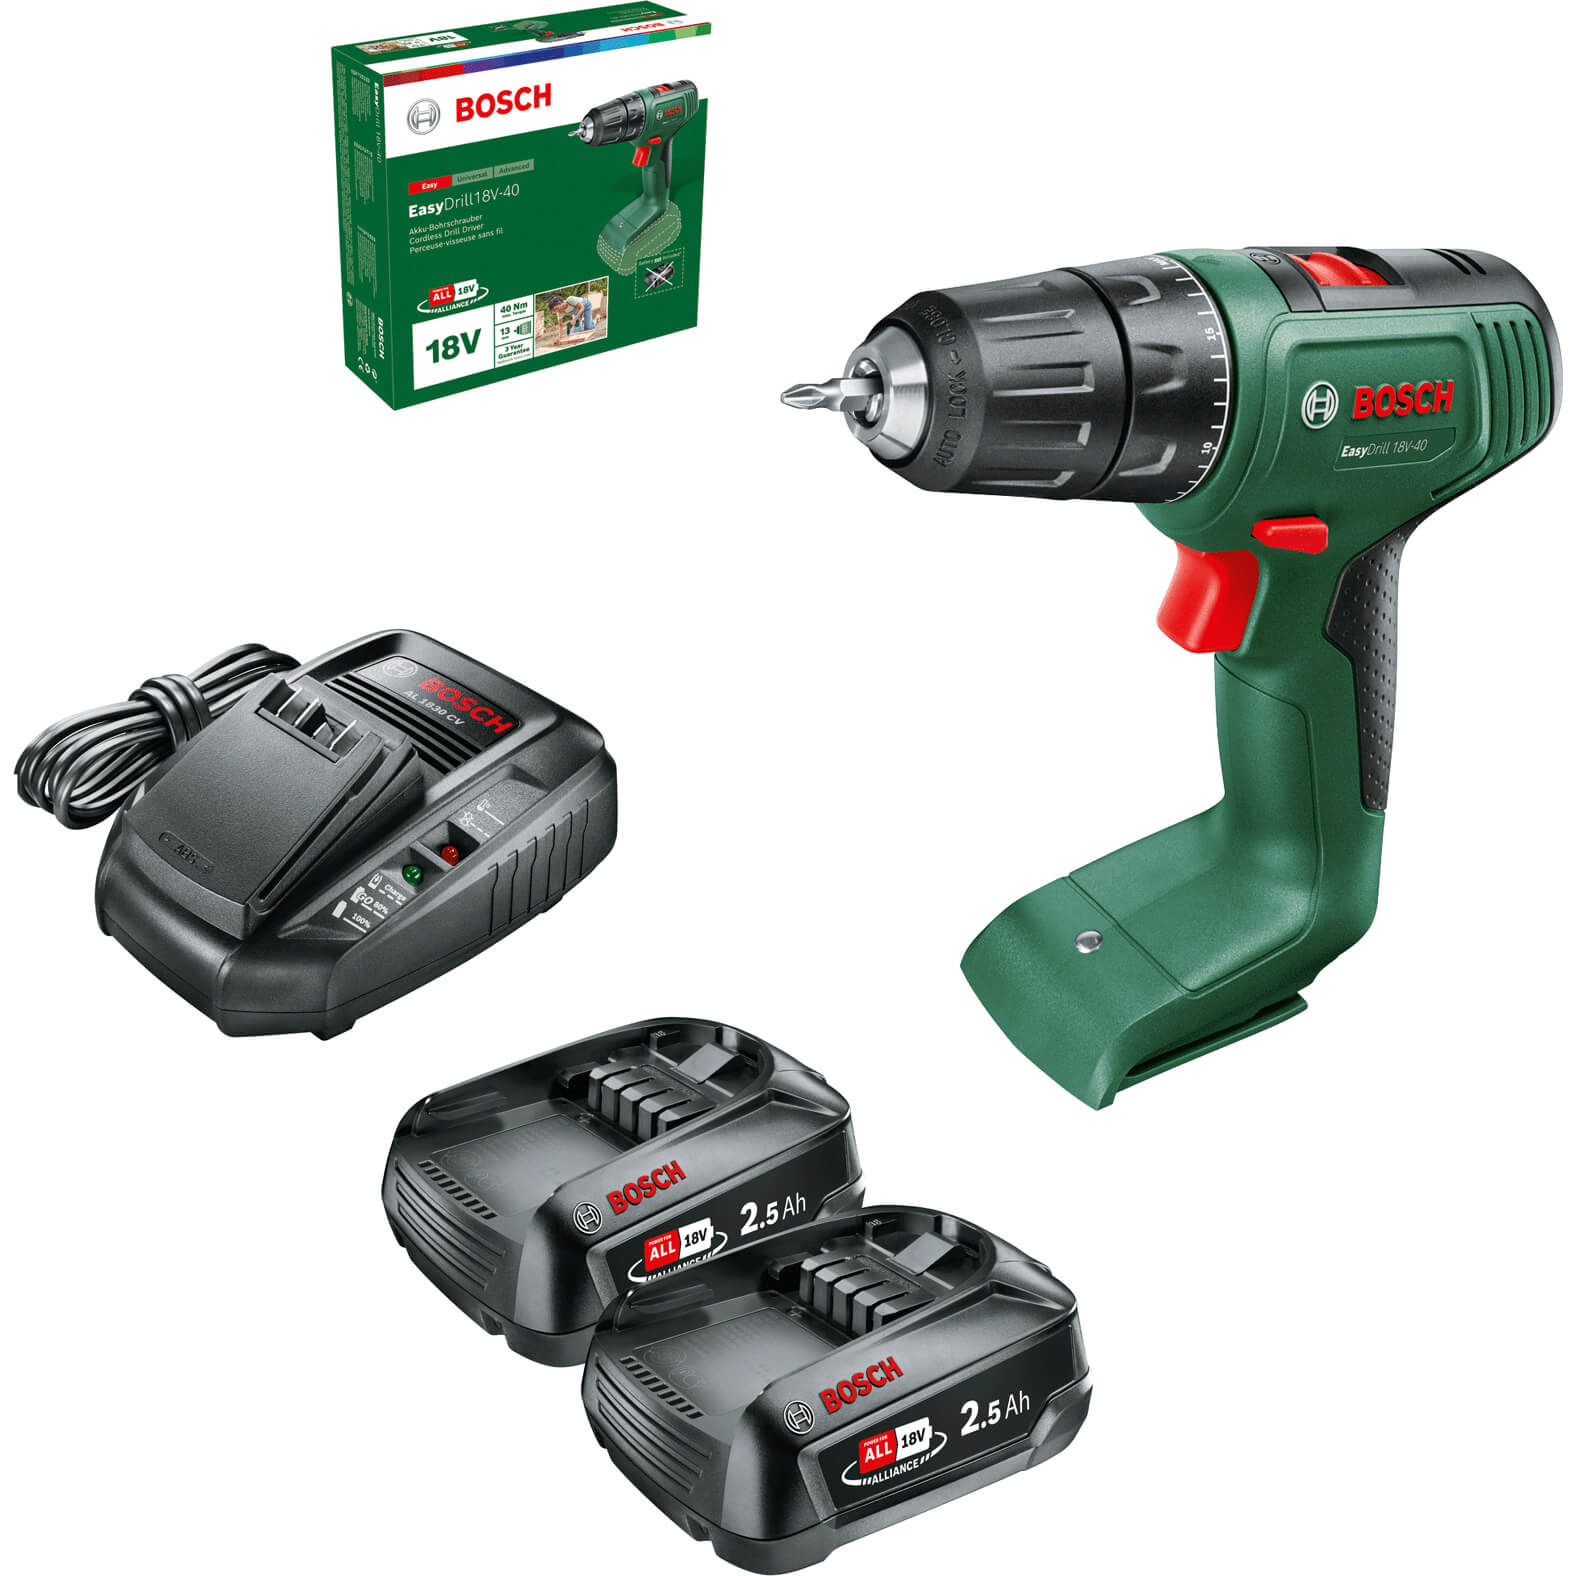 Image of Bosch EASYDRILL 18V-40 18v Cordless Drill Driver 2 x 2.5ah Li-ion Charger No Case